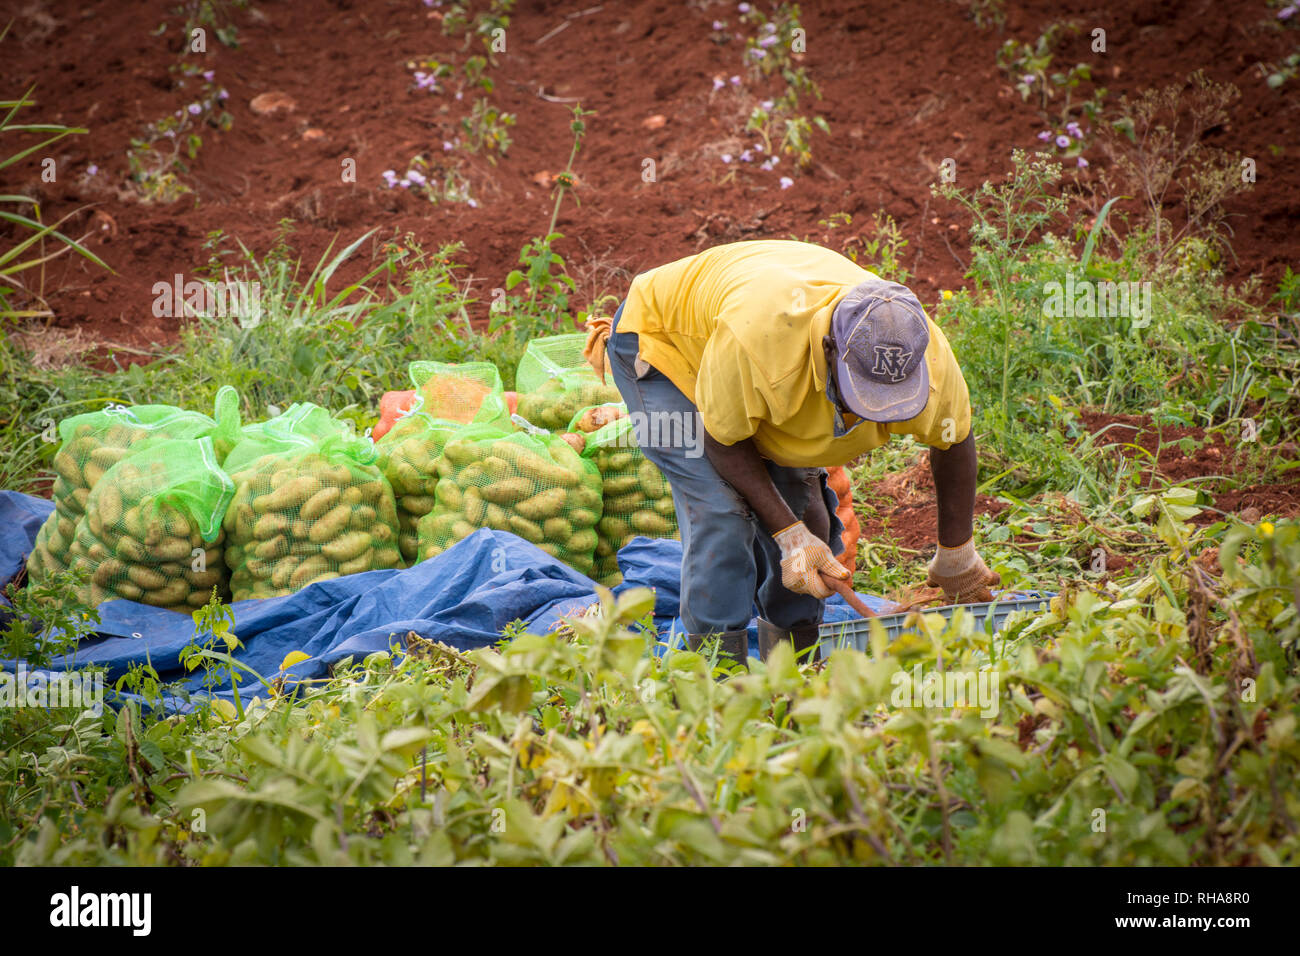 Farmer at work in on farmland with bags of Irish Potatoes in background. Stock Photo